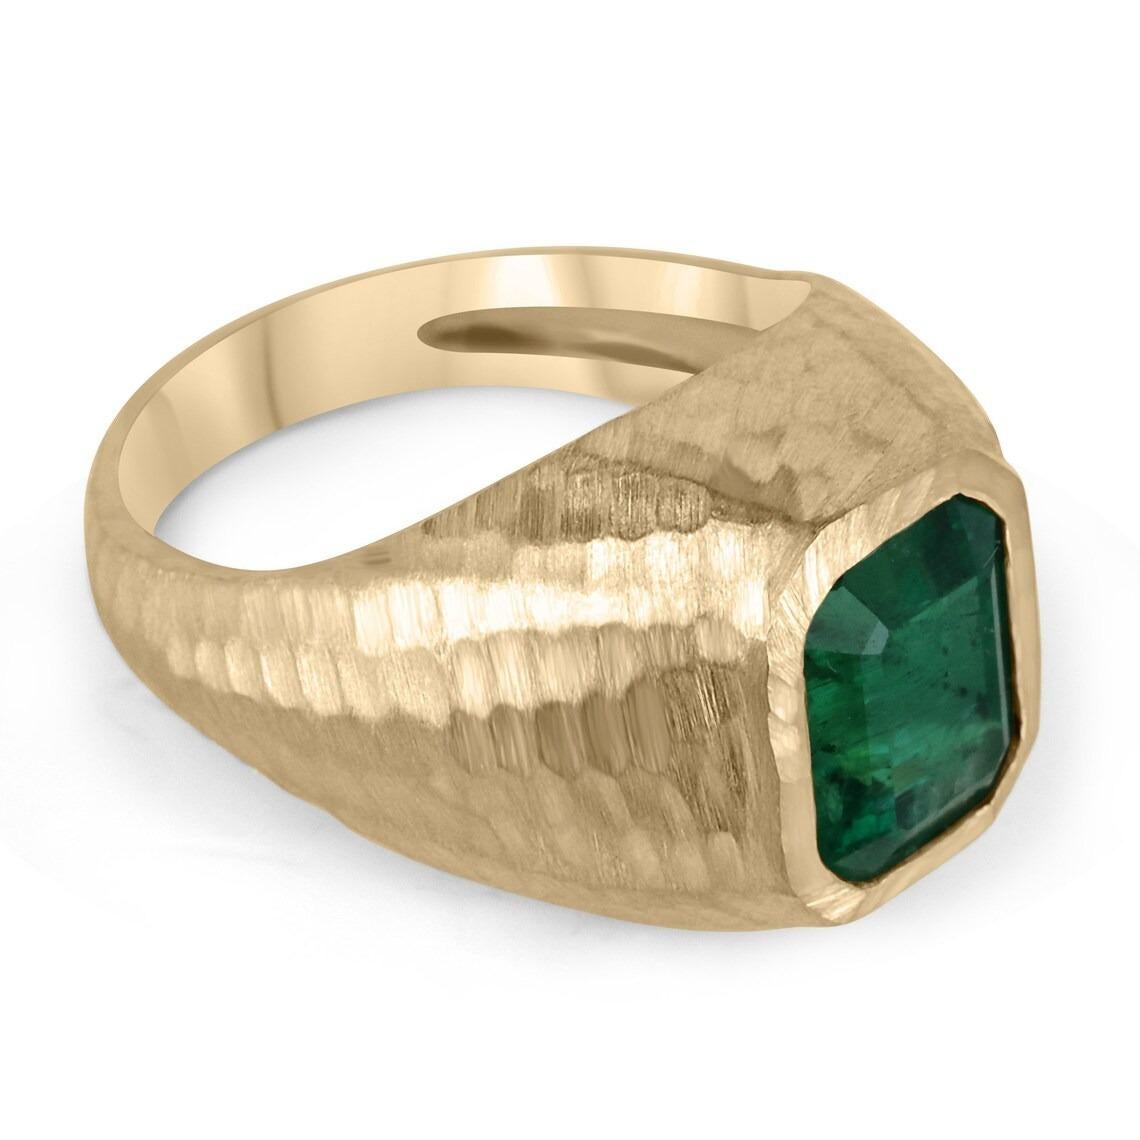 This men's sleek solitaire gold ring says it all. This ring is made with the finest, genuine materials from our emerald collection. The emerald-cut gemstone is natural and from the earth. The gem featured in this ring is of excellent color and very